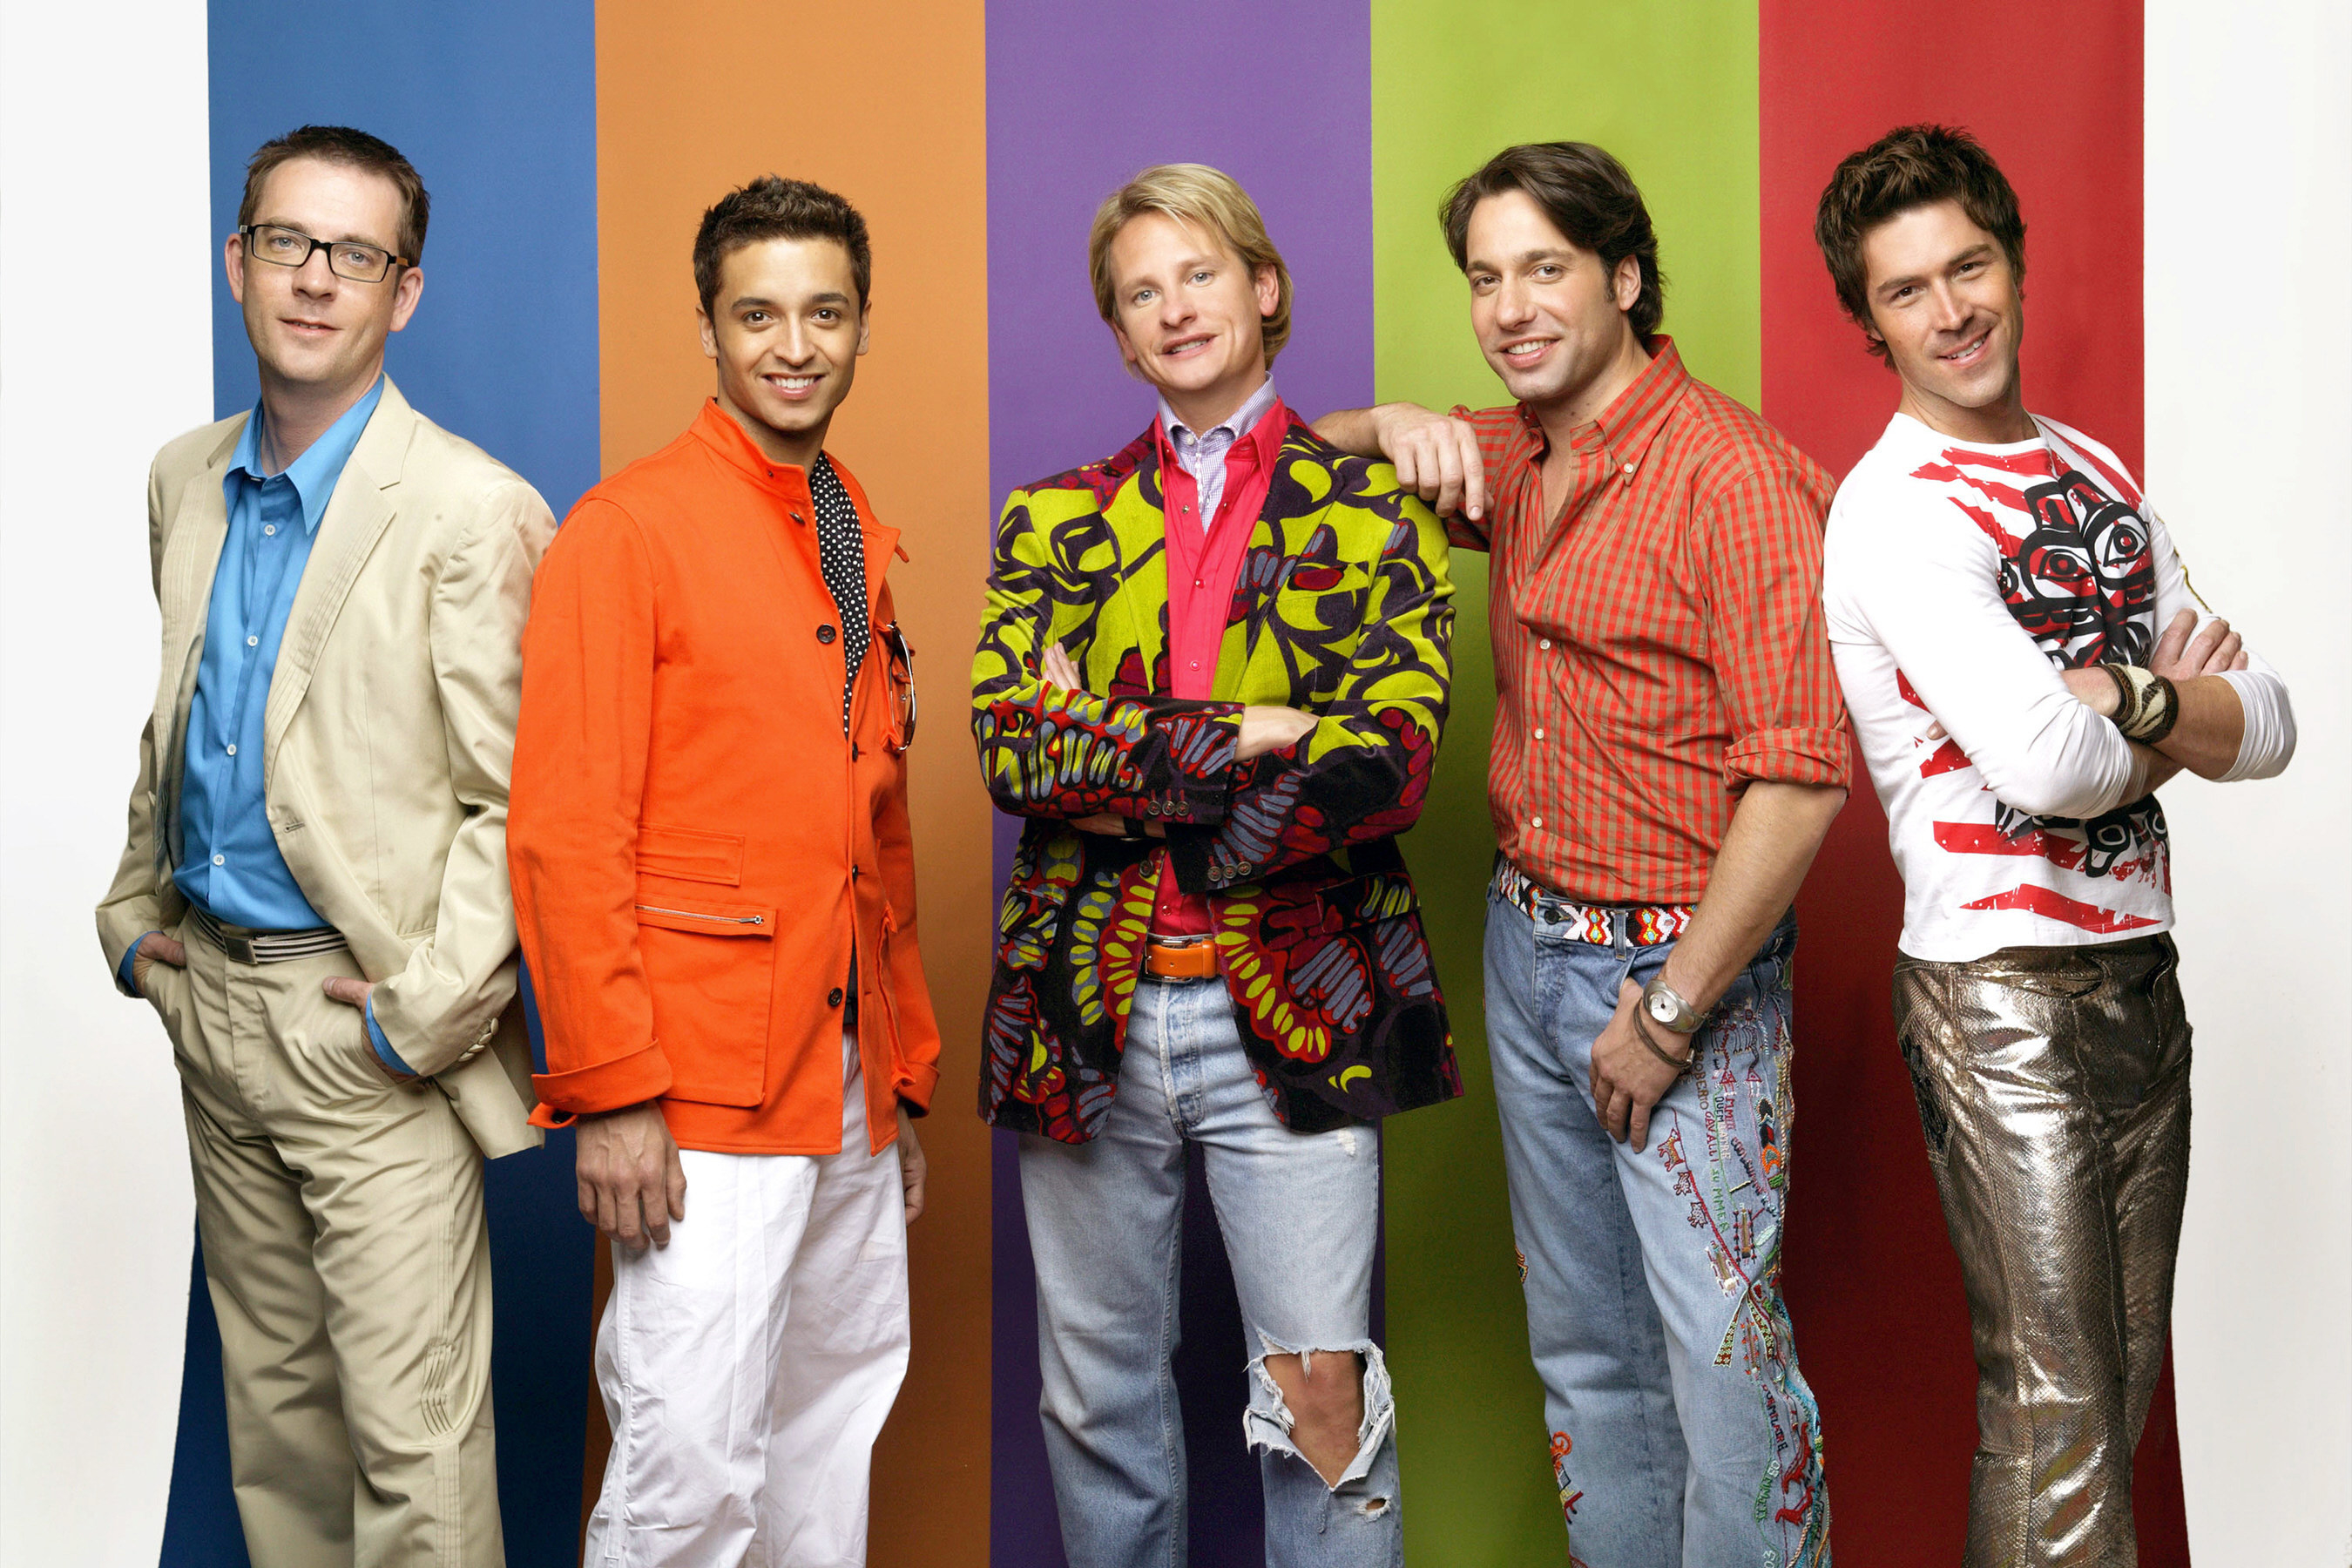 the cast posing in front of a rainbow background